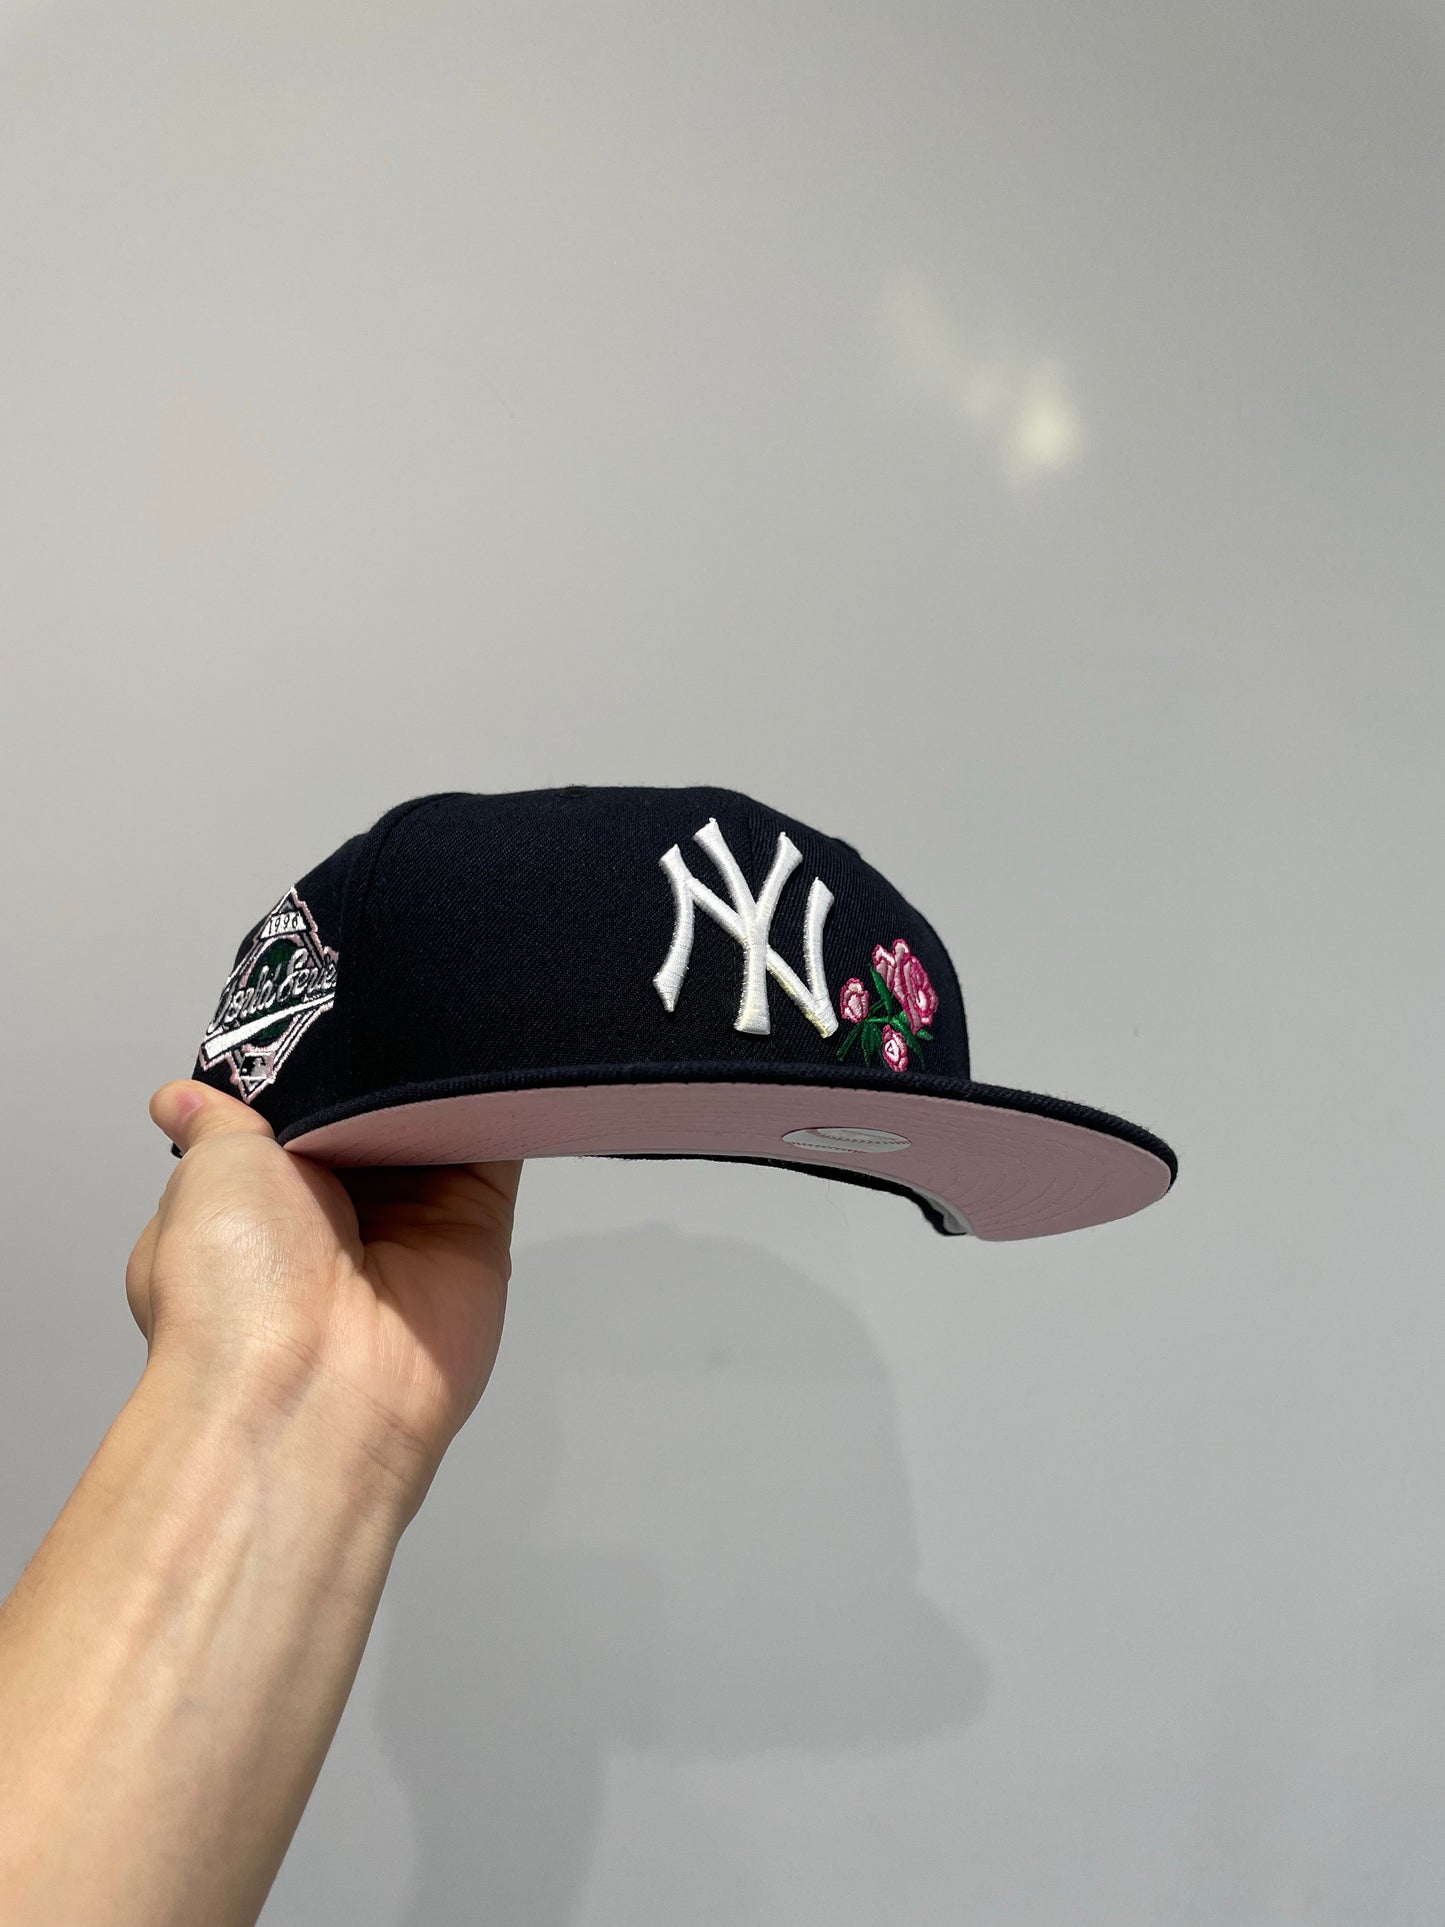 NY YANKEES PINK ROSE 🌷59FIFTY FITTED